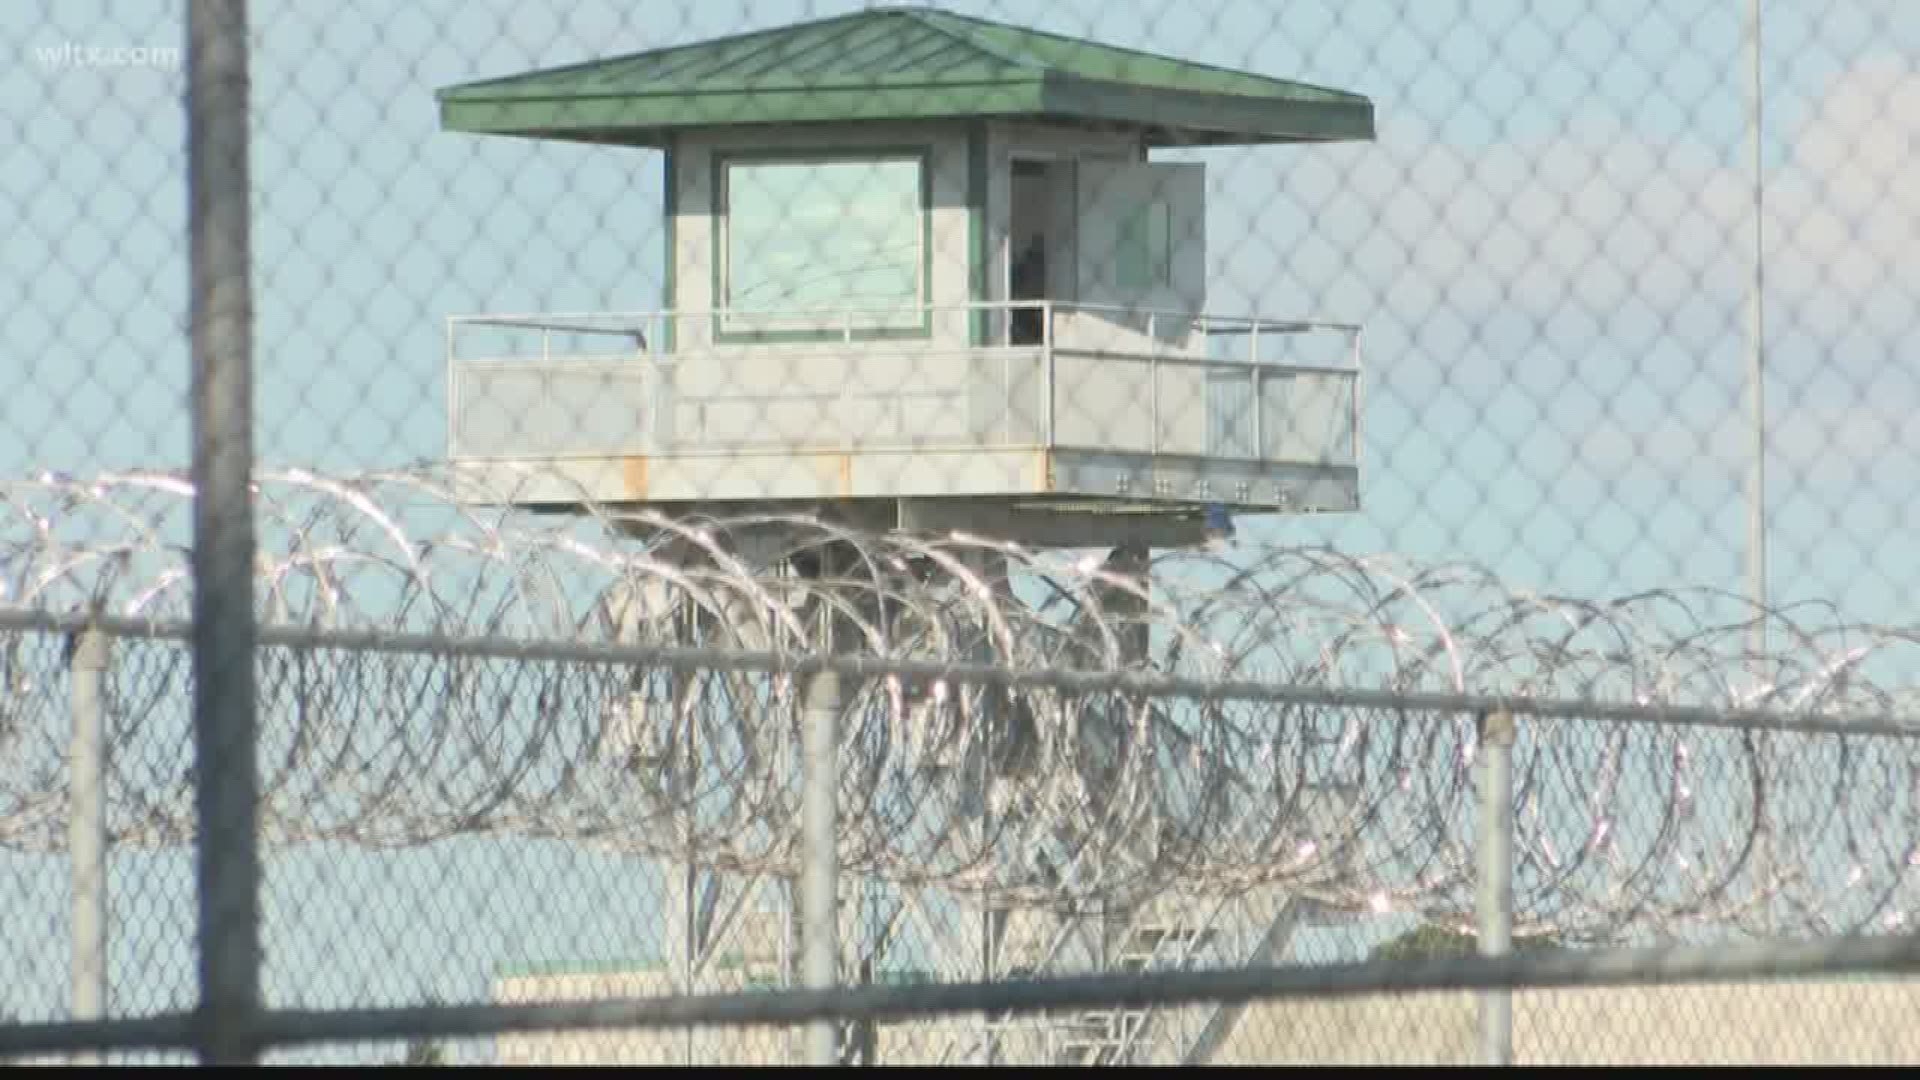 Over the past several days we have received calls and facebook messages asking about the Lee Correctional riot... Many of the people contacting us claim more inmates died in the fight than what has been reported.  They asked us to verify if these reports